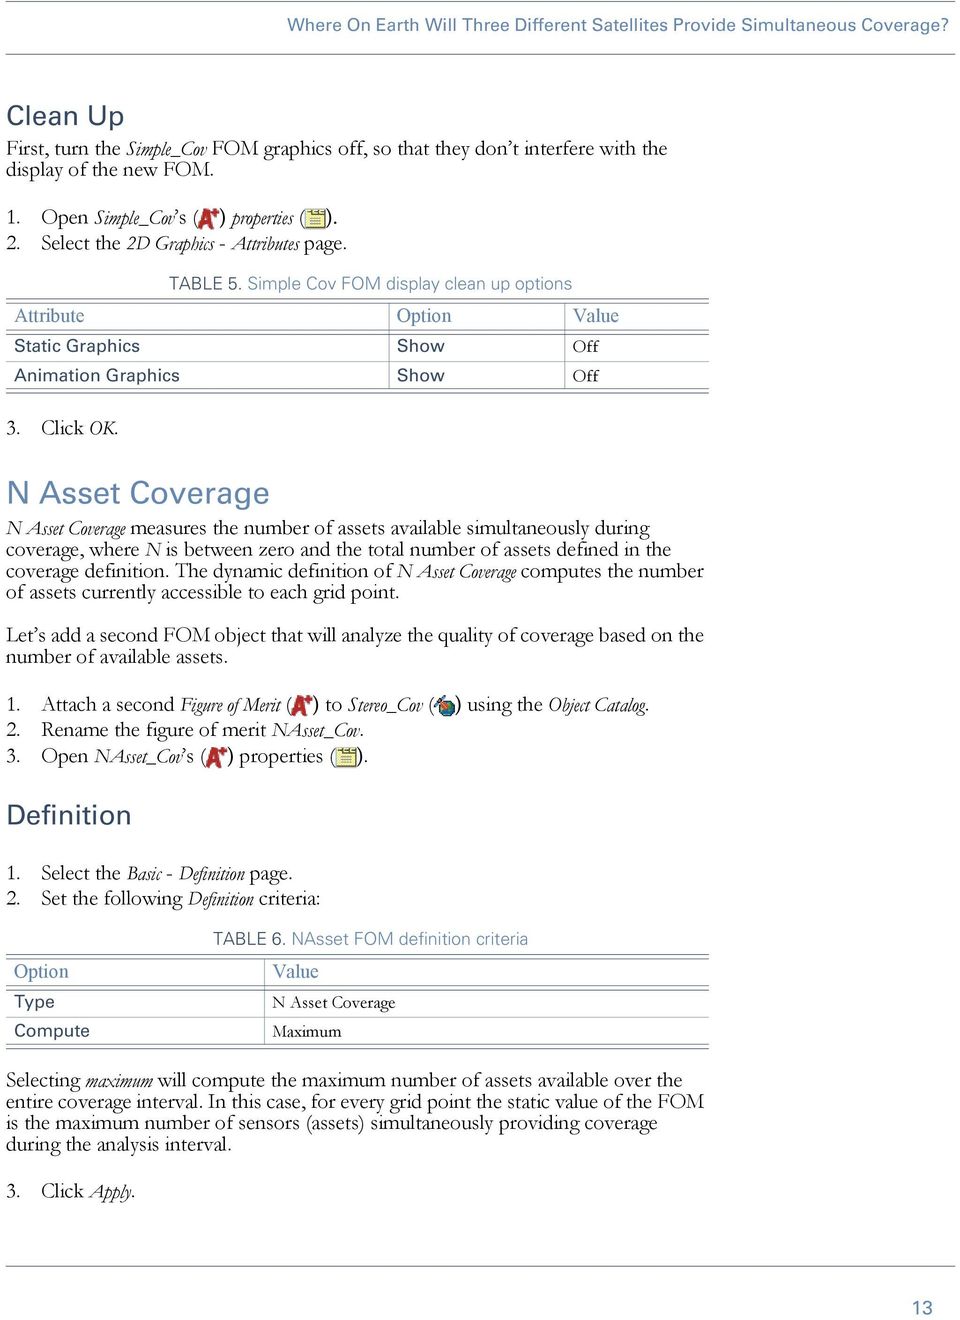 N Asset Coverage N Asset Coverage measures the number of assets available simultaneously during coverage, where N is between zero and the total number of assets defined in the coverage definition.